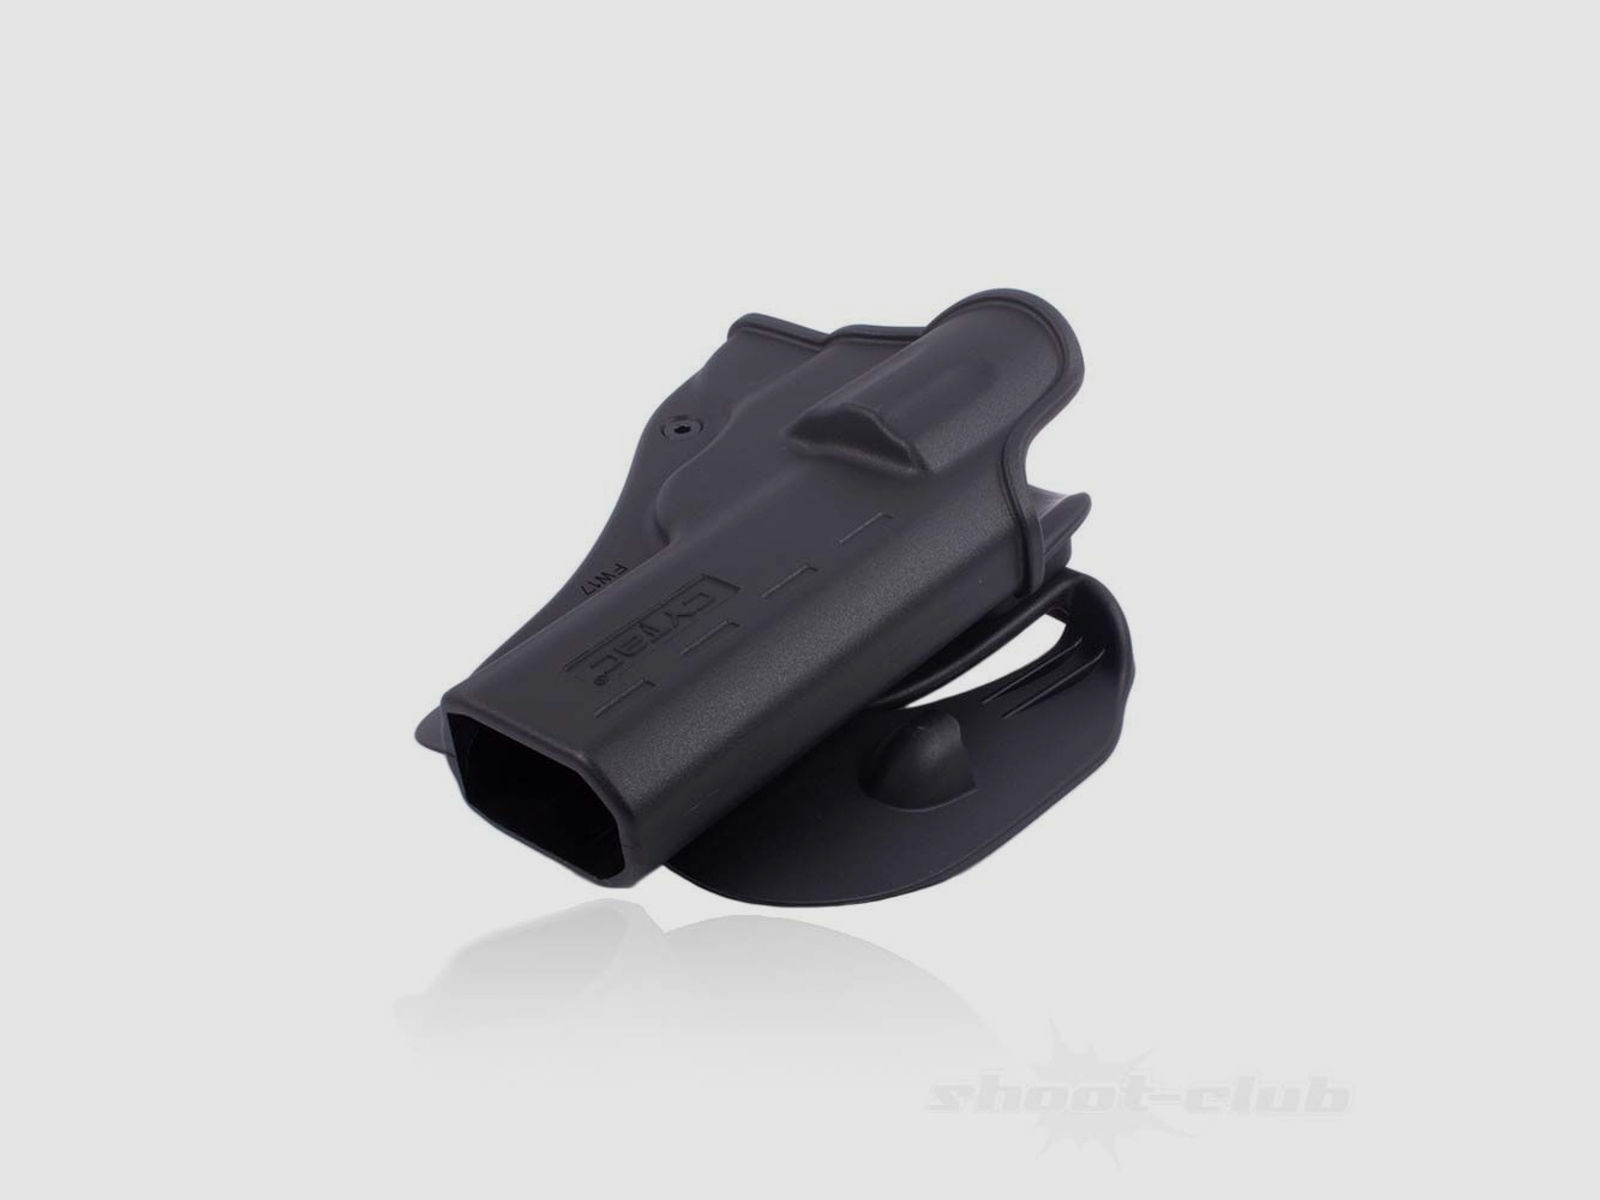 Cytac F-Fast Draw Paddle Holster Weihrauch Windicator 4"